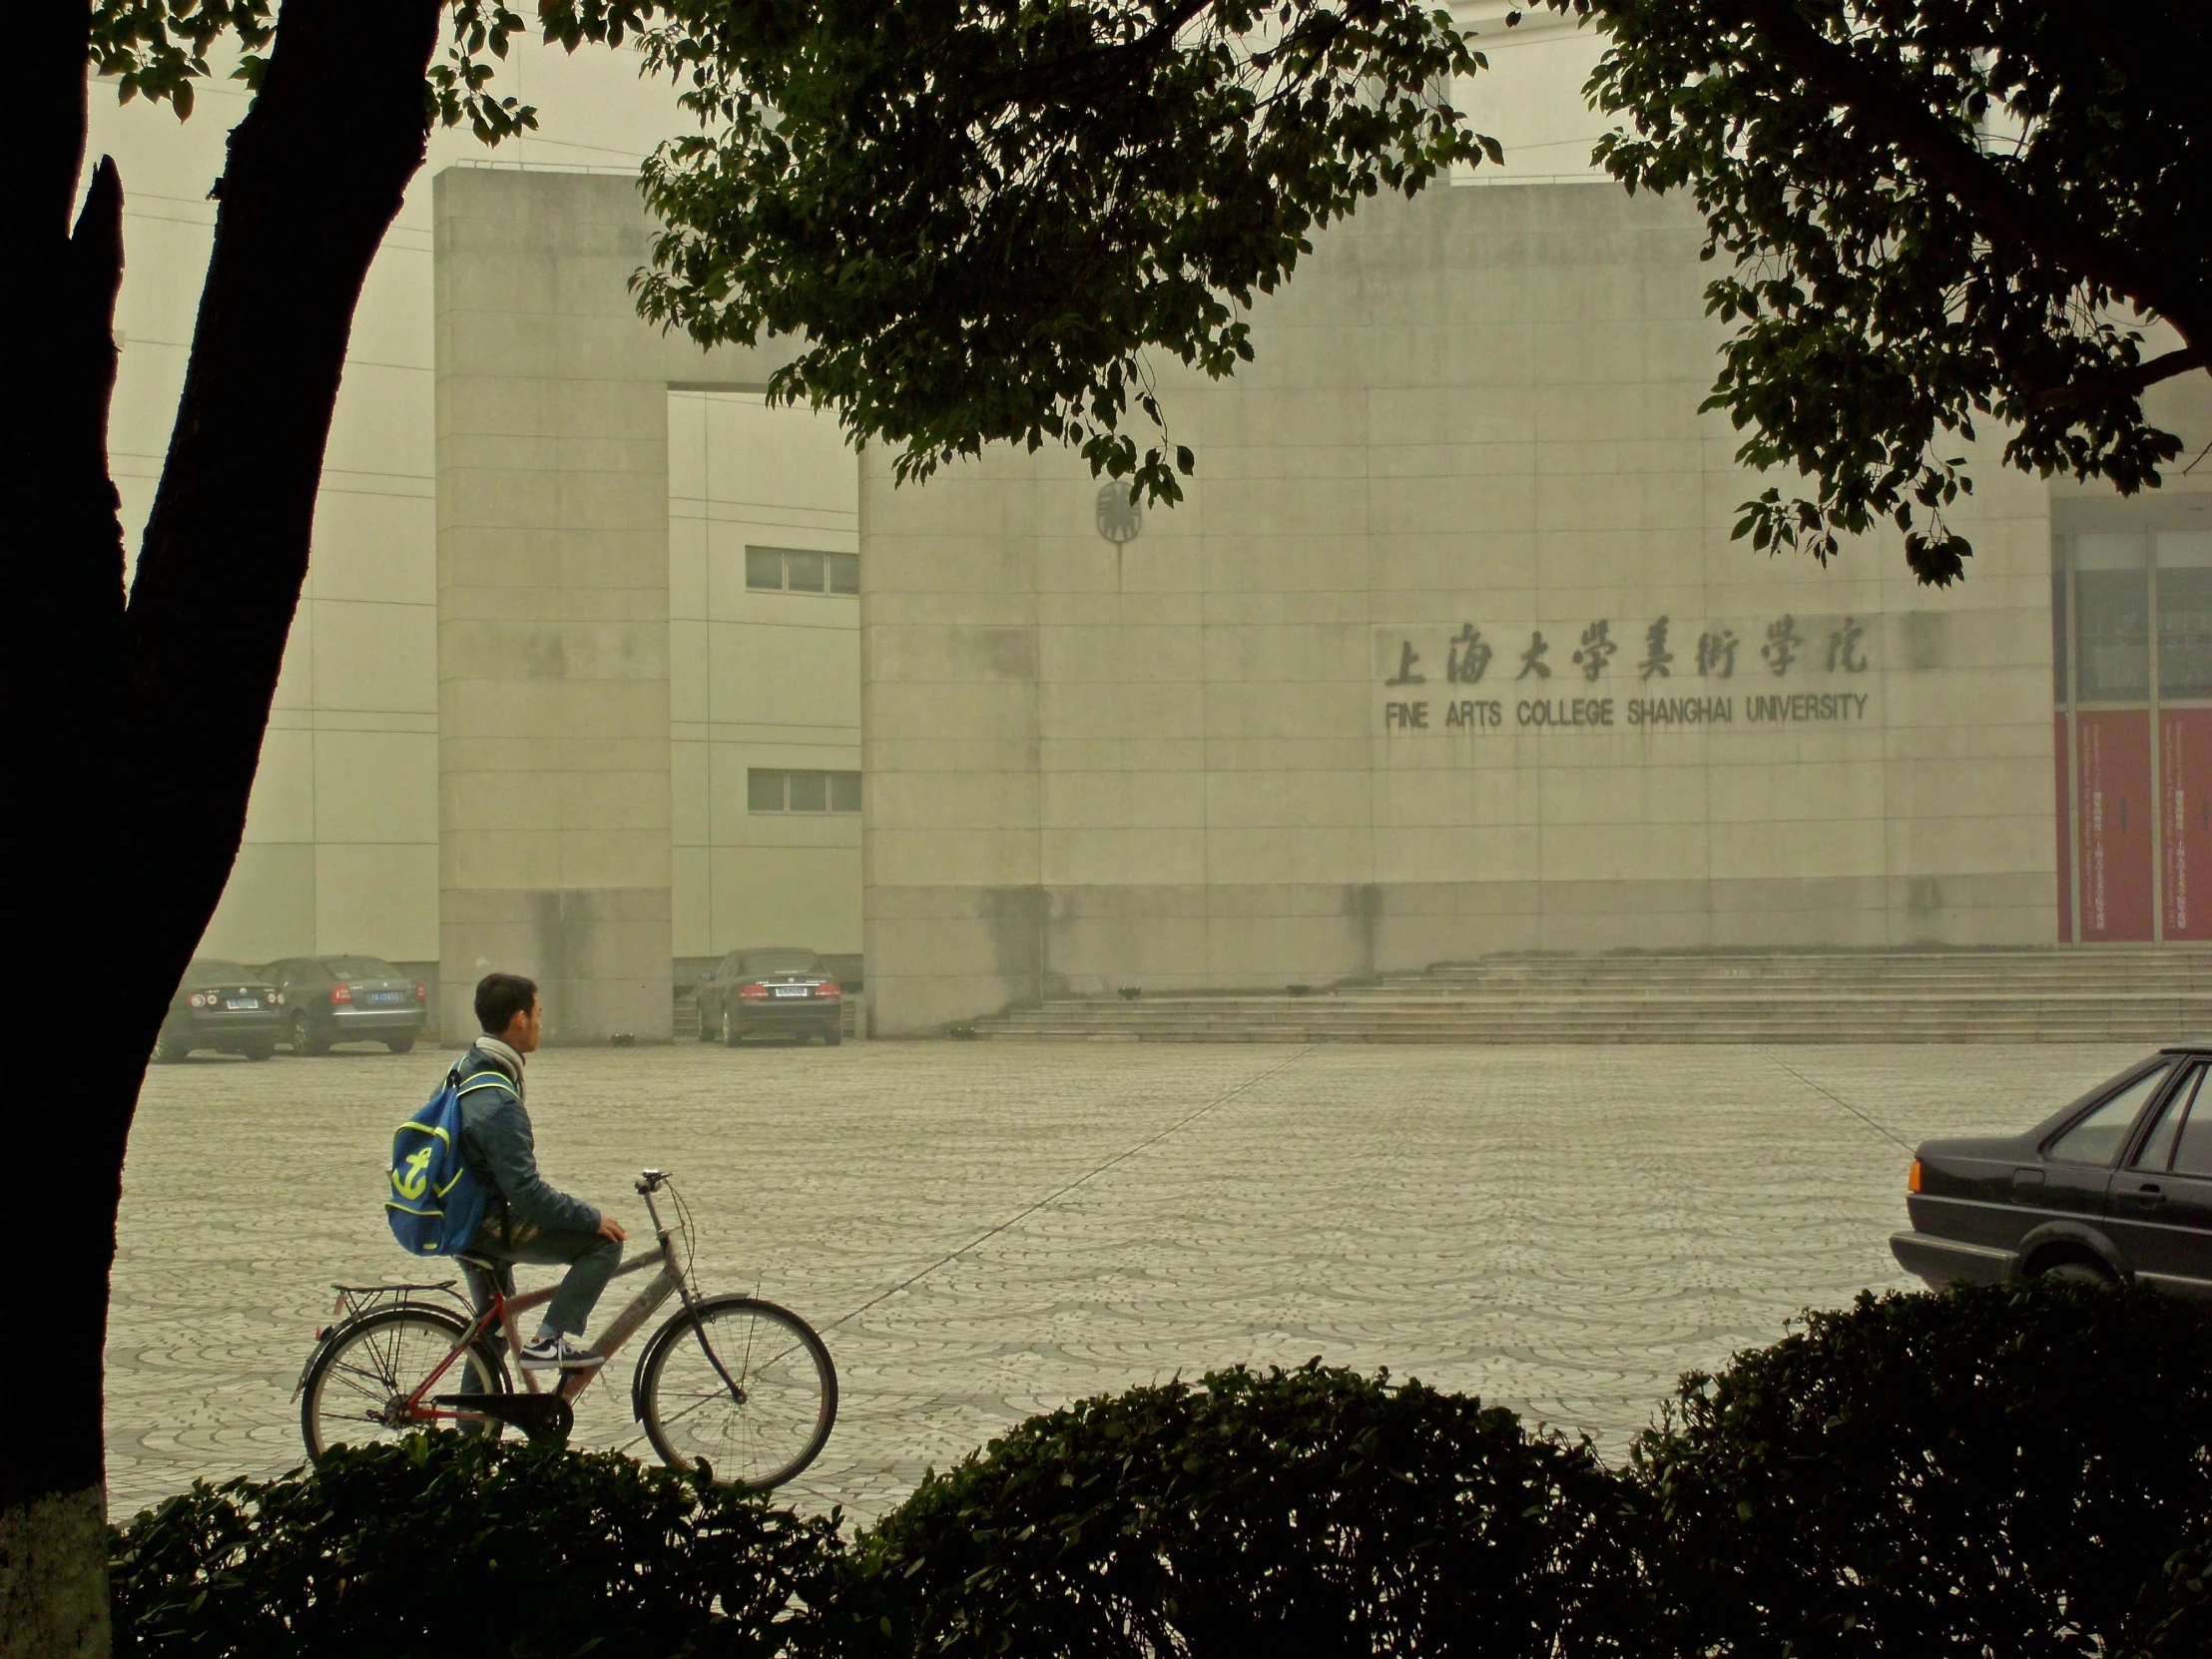 a person on a bike riding past the large building